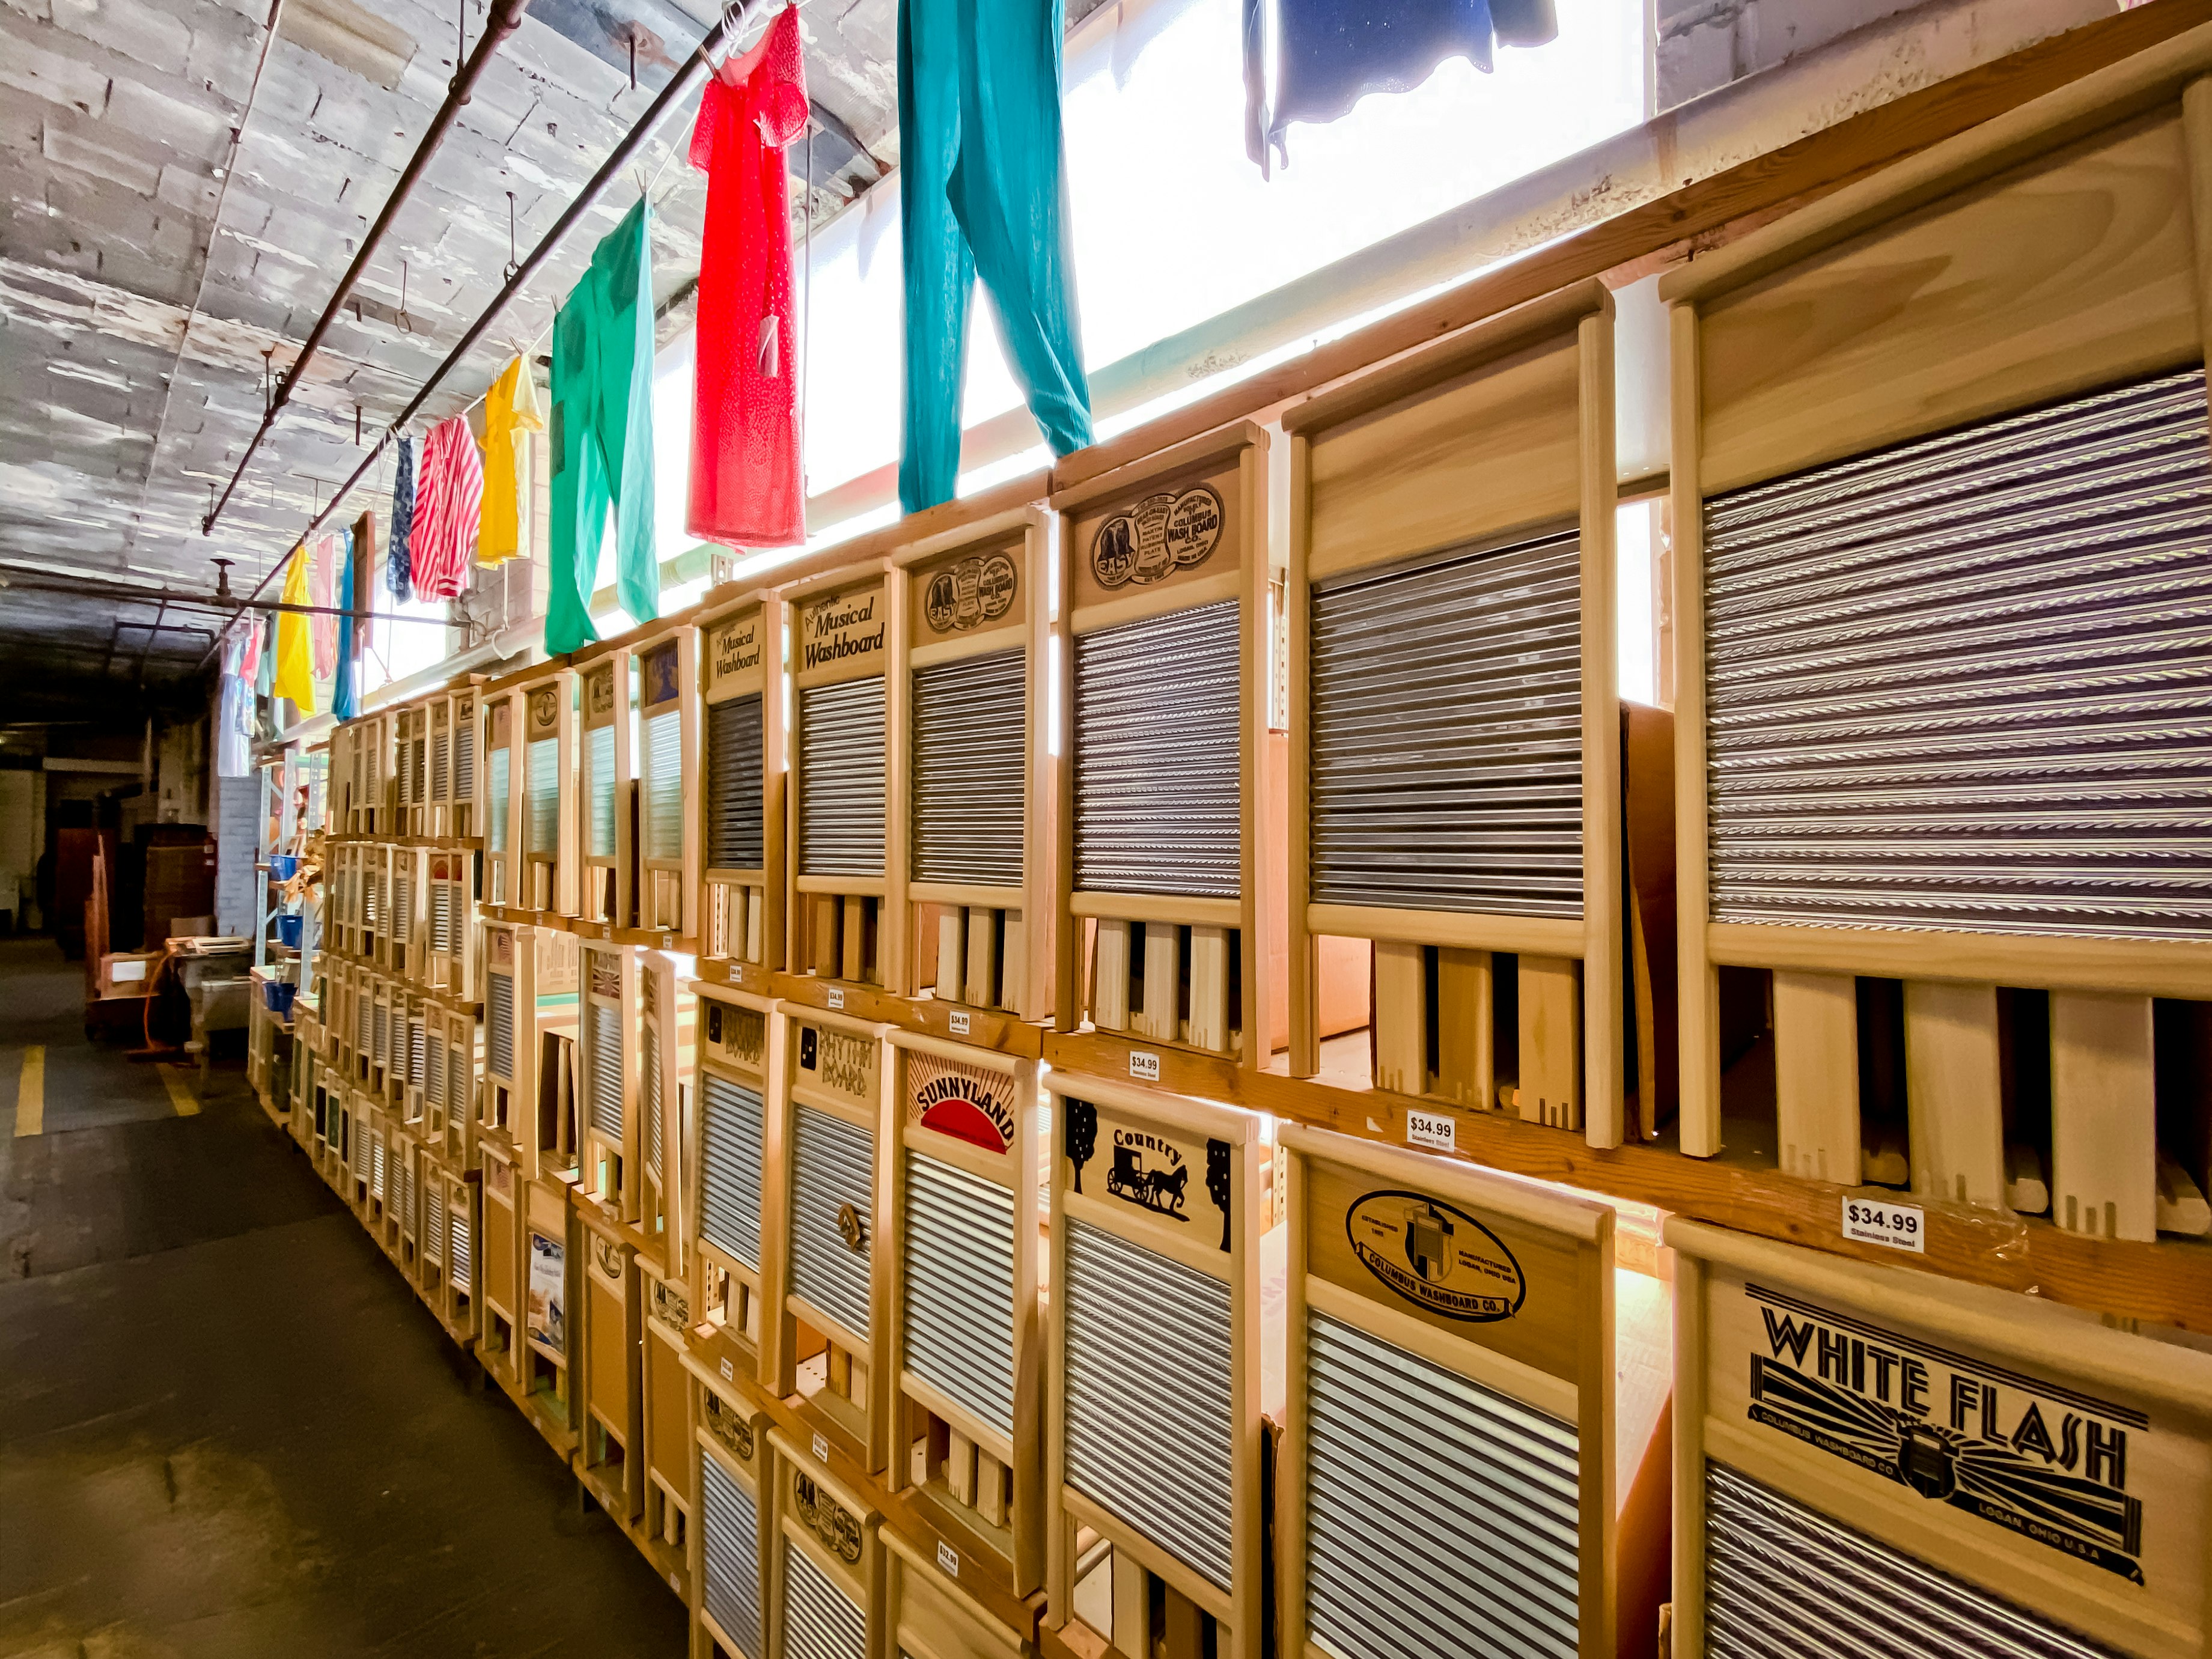 A long row of washboards produced in Logan Ohio is illuminated by a strip of clerestory windows around the top edge of the factory walls. In front of those windows hang brightly colored articles of clothing, like laundry out to dry.